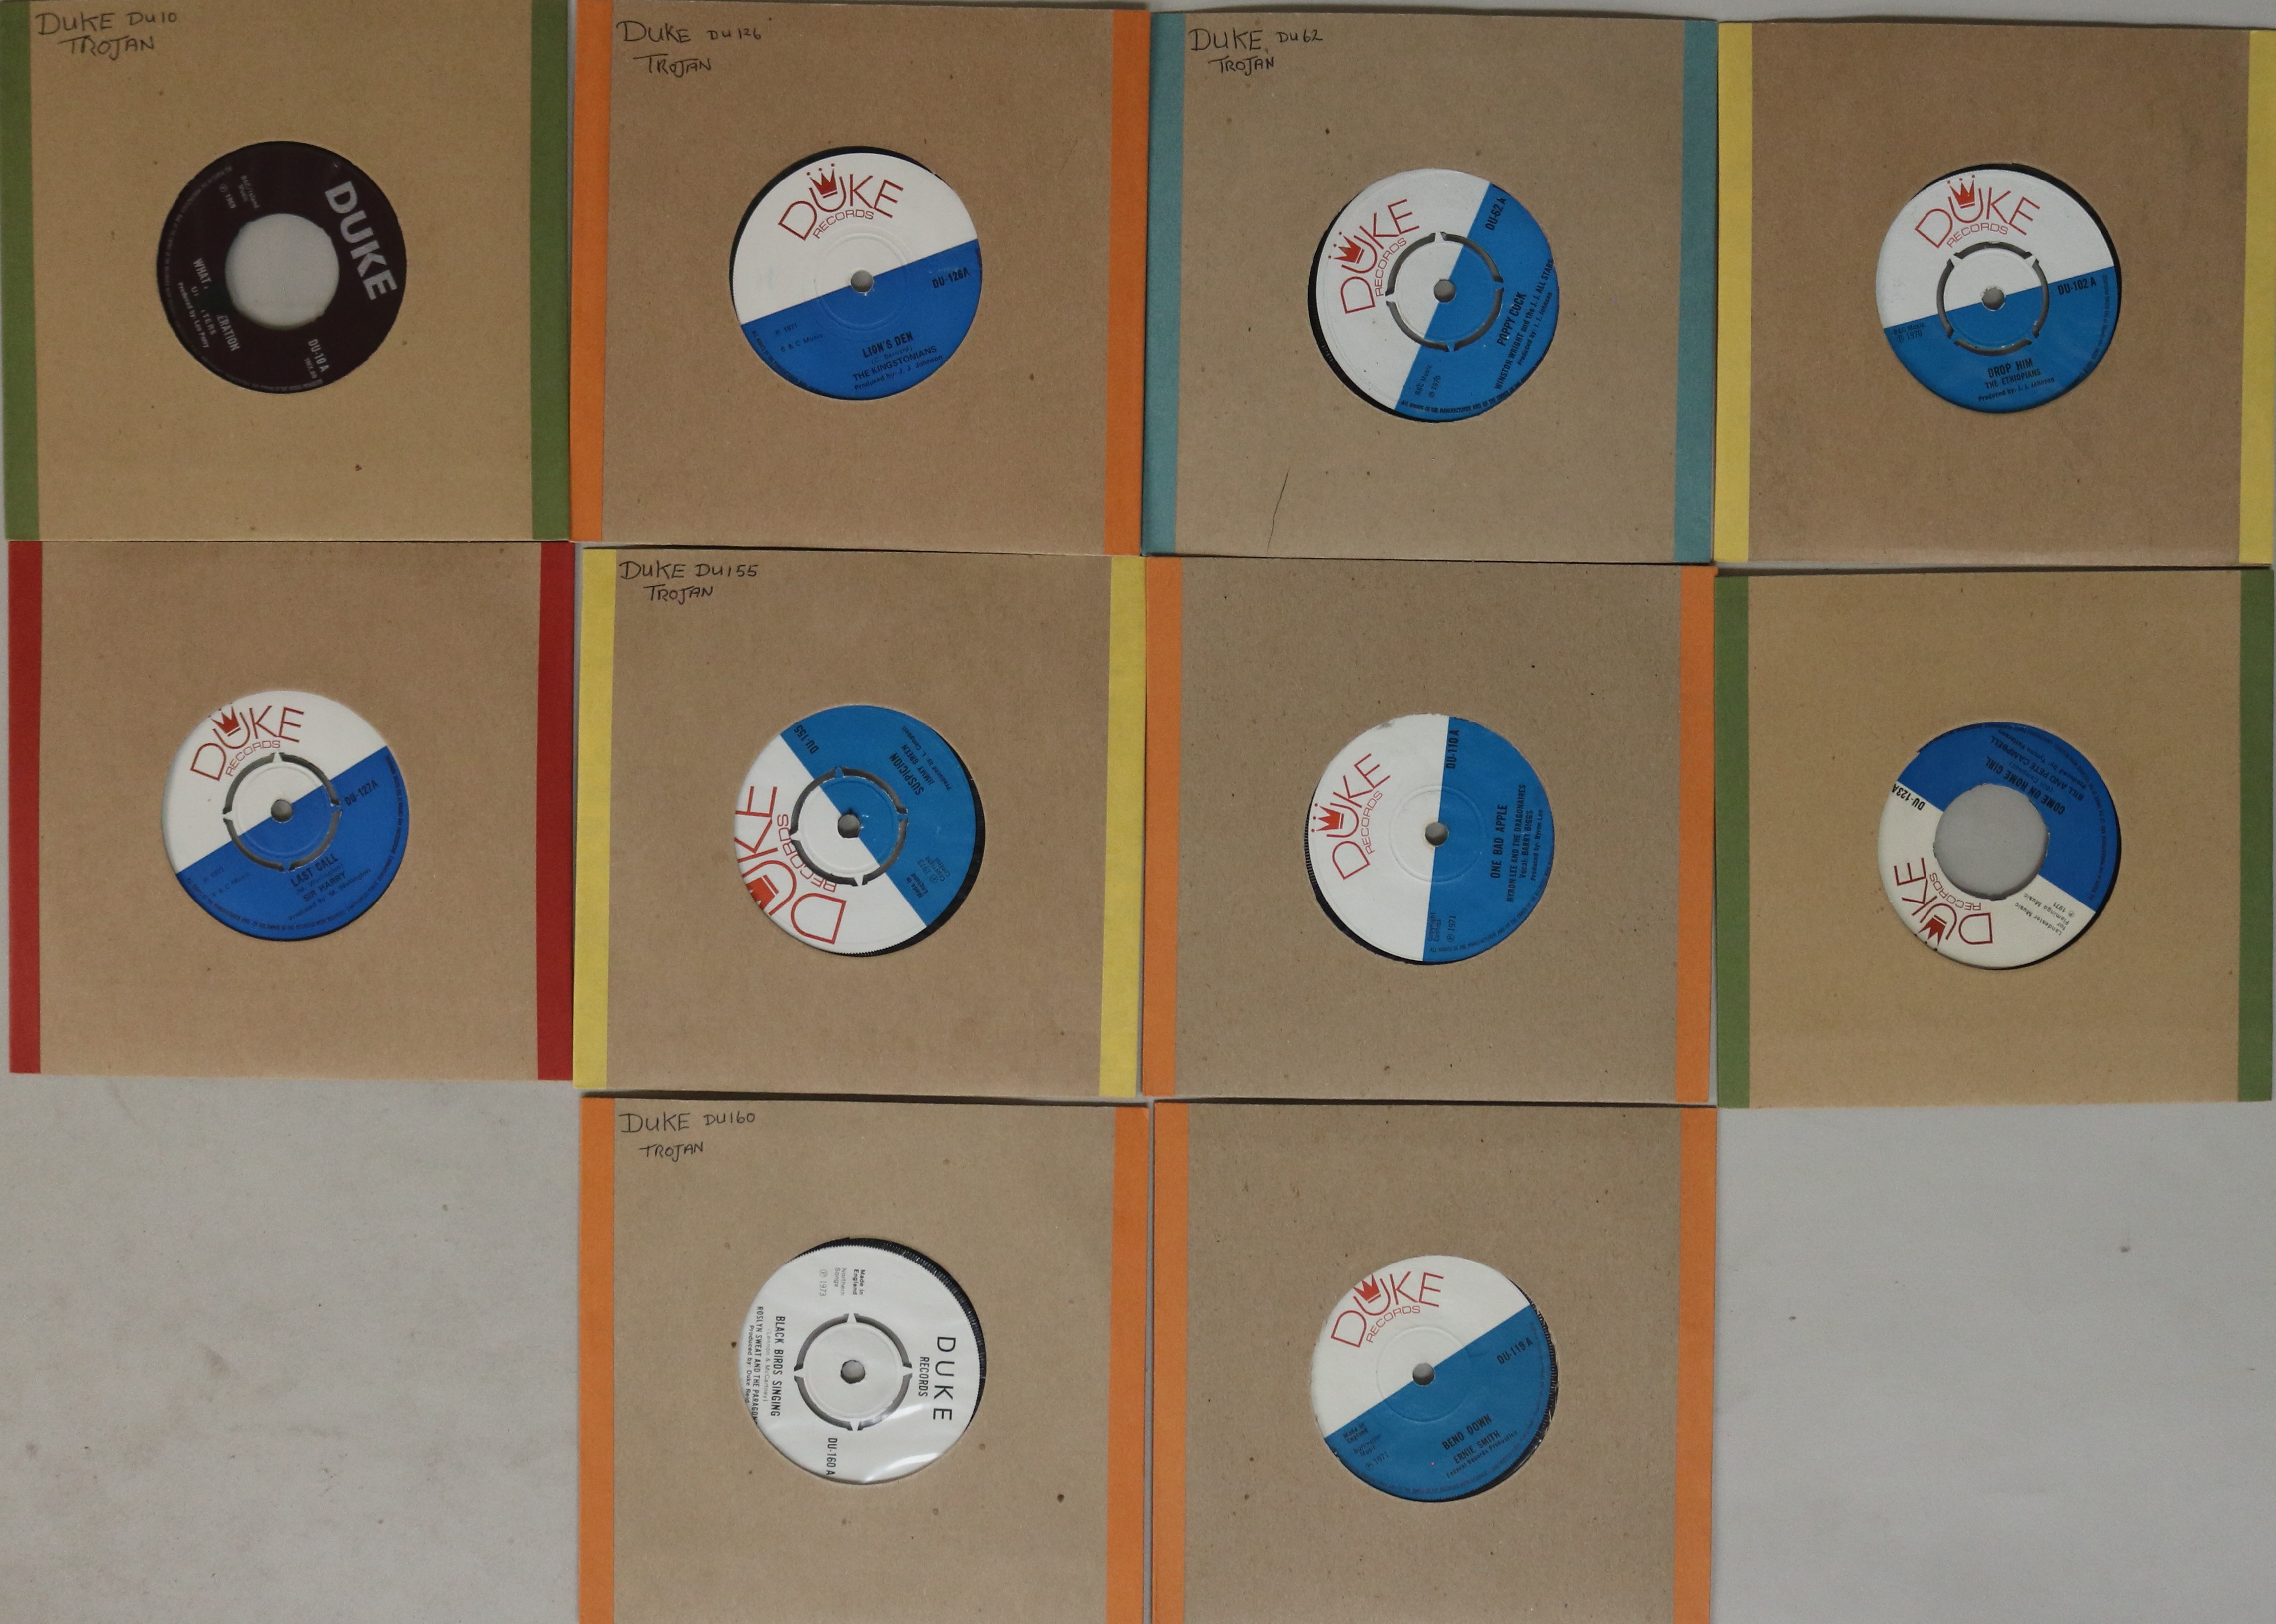 DUKE RECORDS - 7". Expert collection of 10 x 45s on this superb Trojan subsidiary.